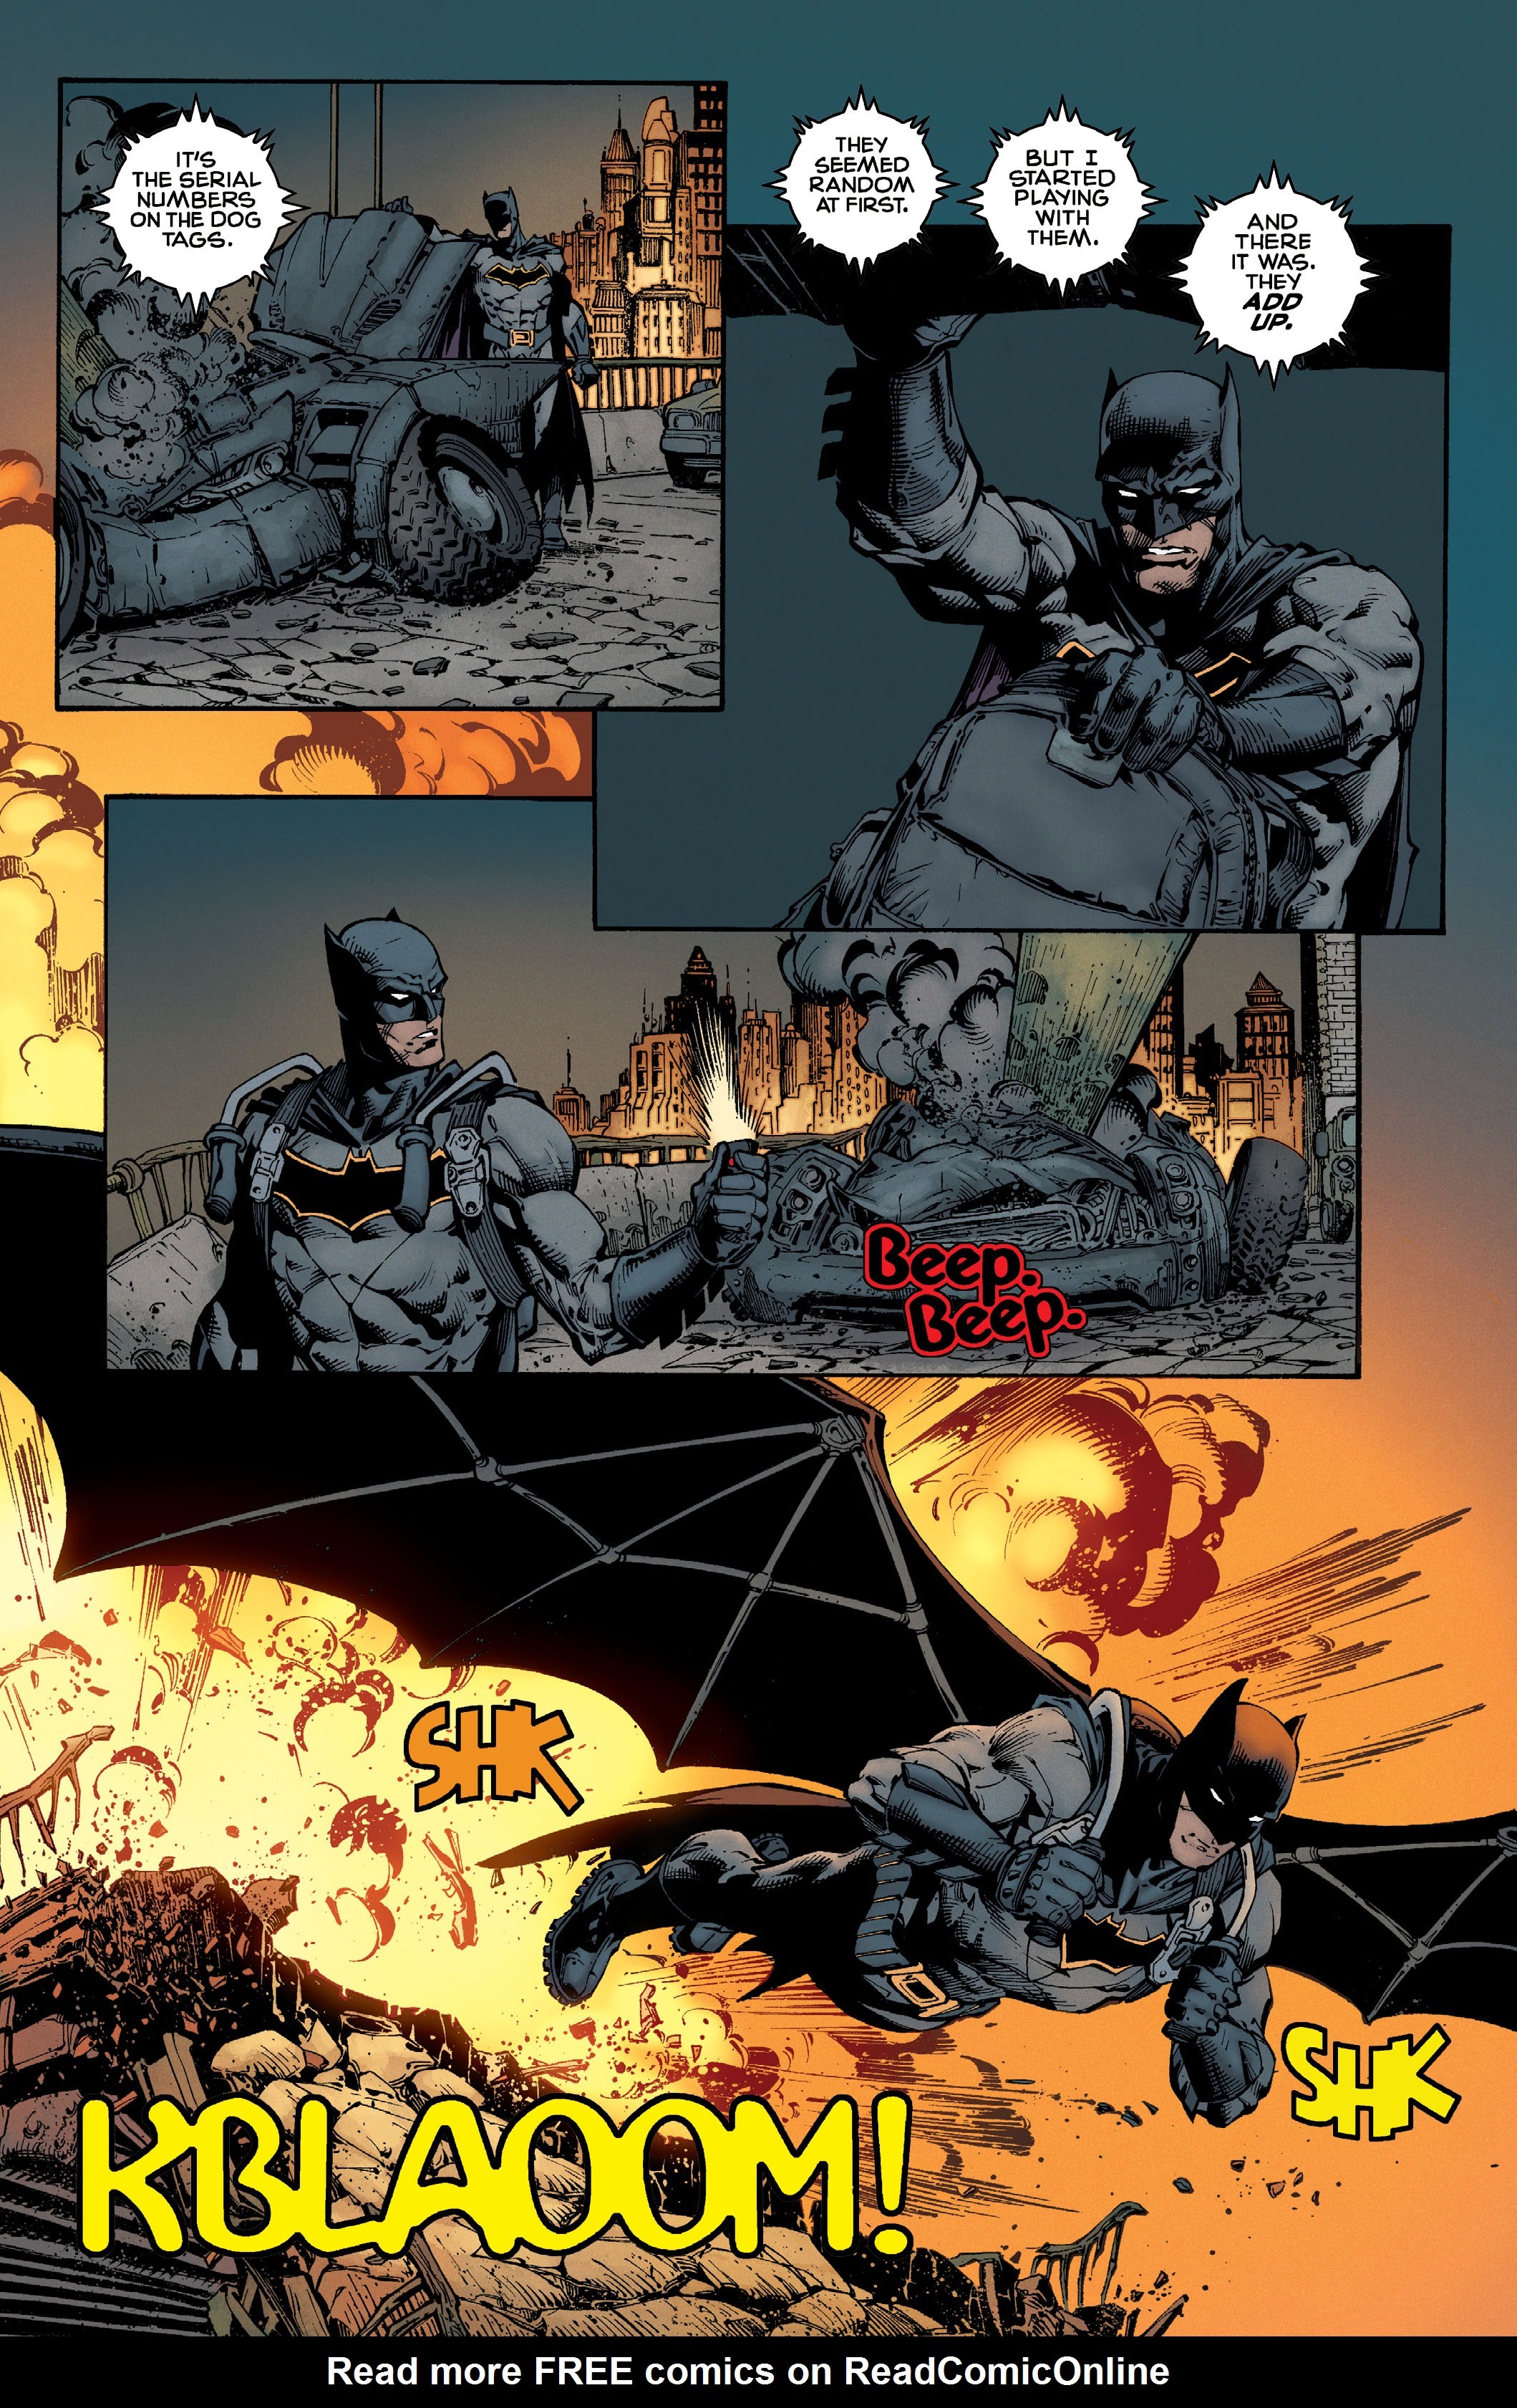 Batman Rebirth Deluxe Edition Tpb 1 Part 2 | Read Batman Rebirth Deluxe  Edition Tpb 1 Part 2 comic online in high quality. Read Full Comic online  for free - Read comics